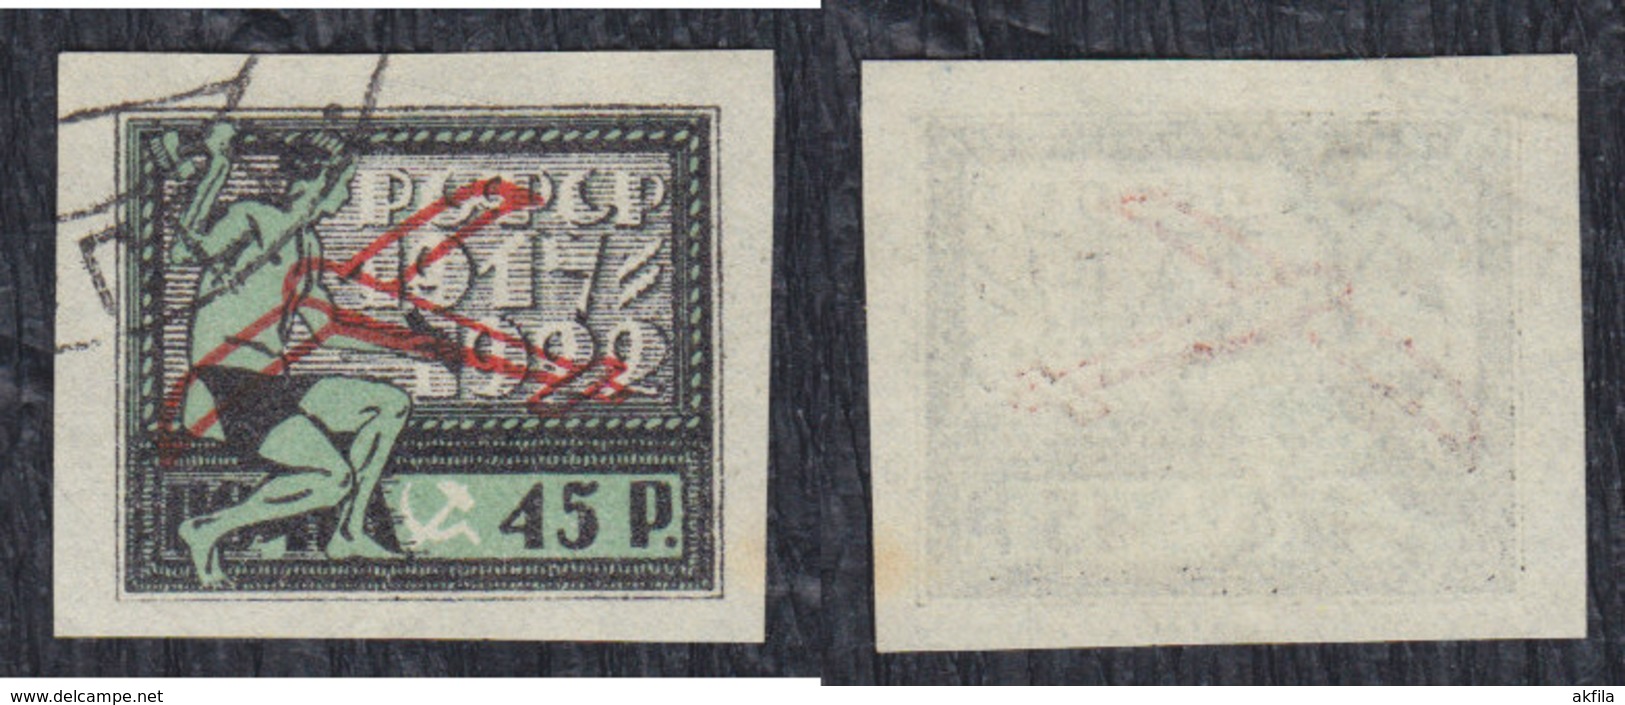 Russia 1922 Airmail Stamp - Value 45 R With Overprint, Used (o) Michel 196 - Used Stamps